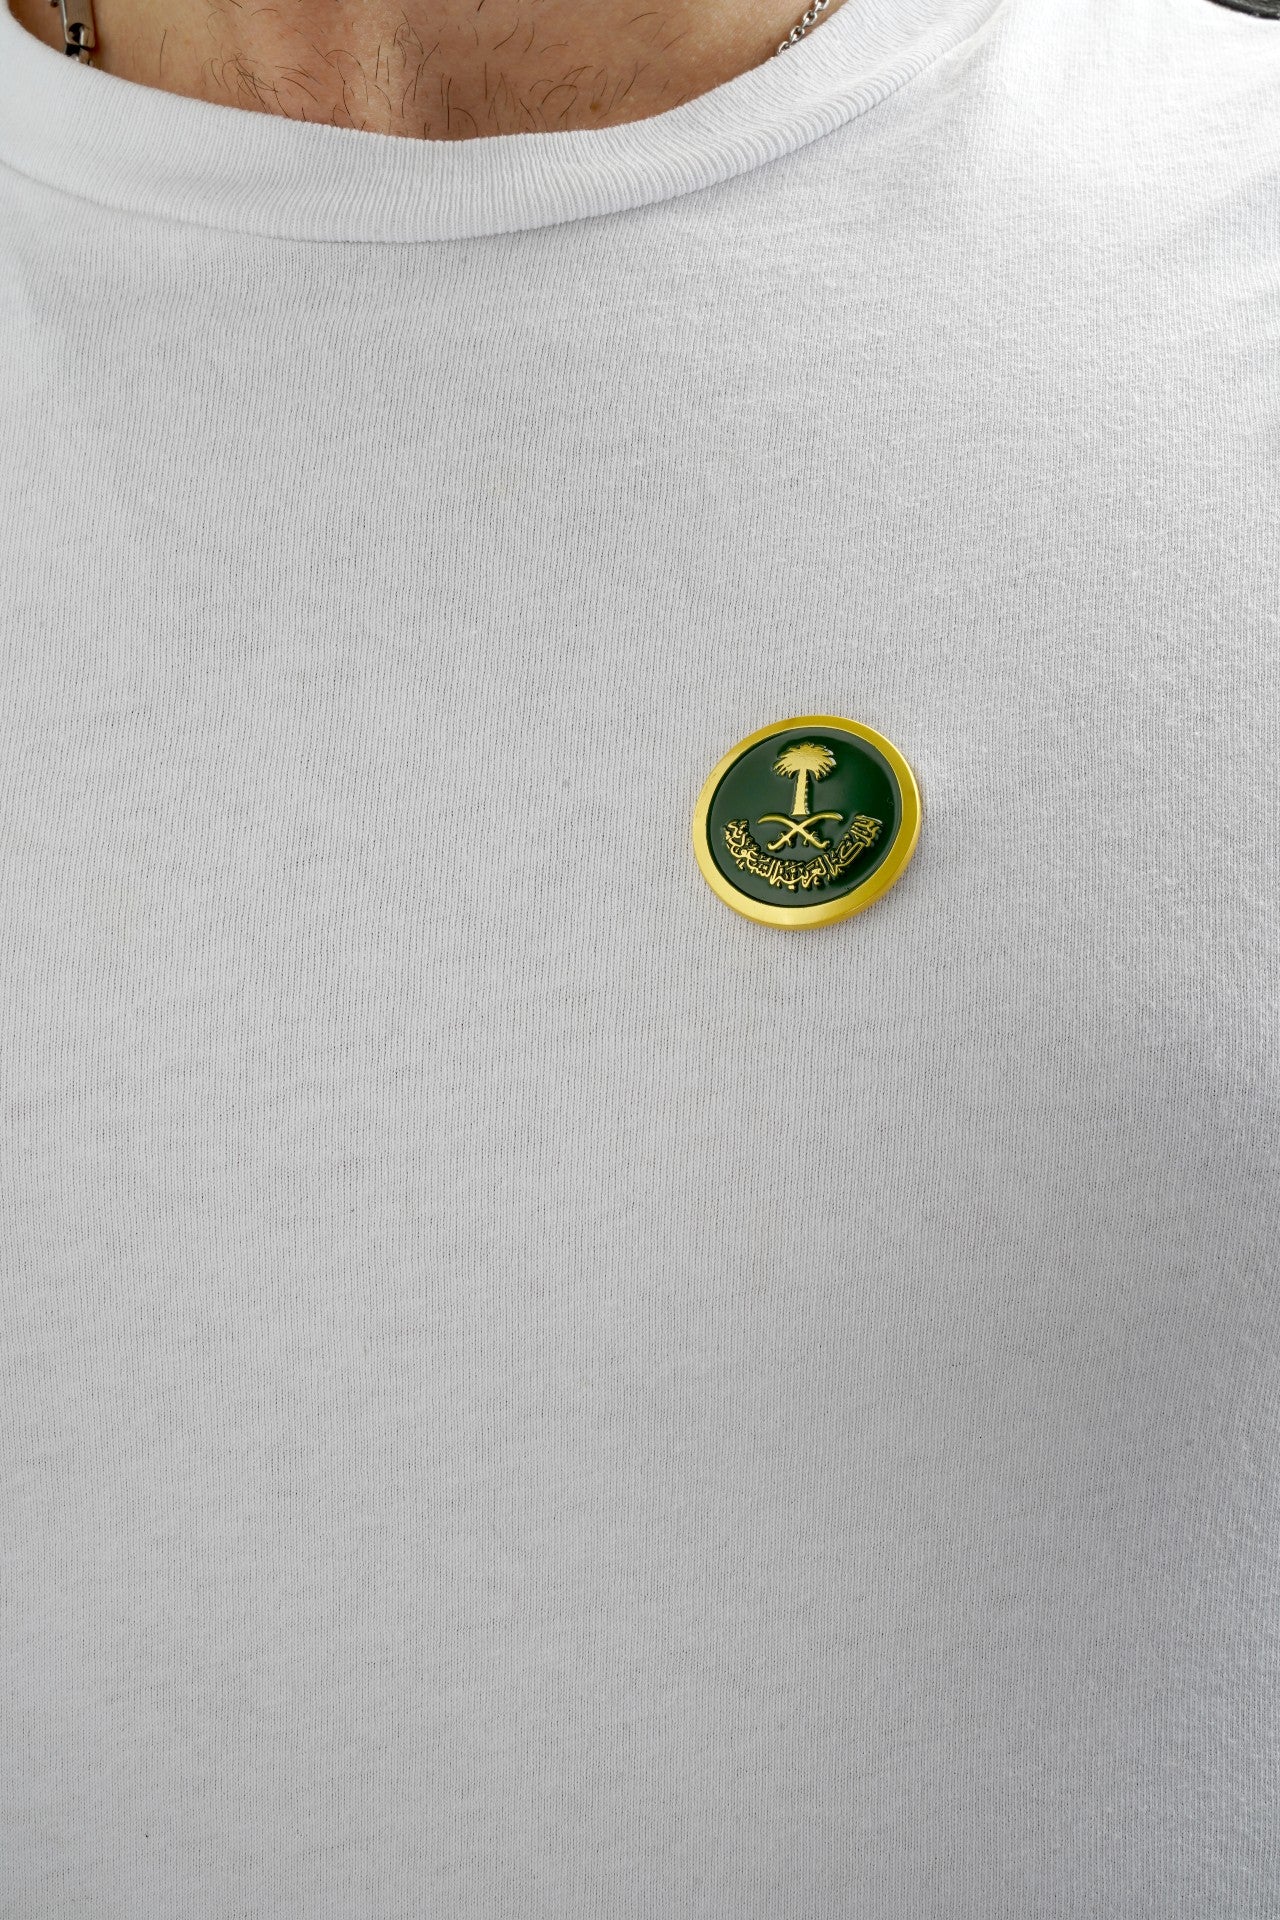 KSA Badge - Small - Green | gifts for men | gifts for women